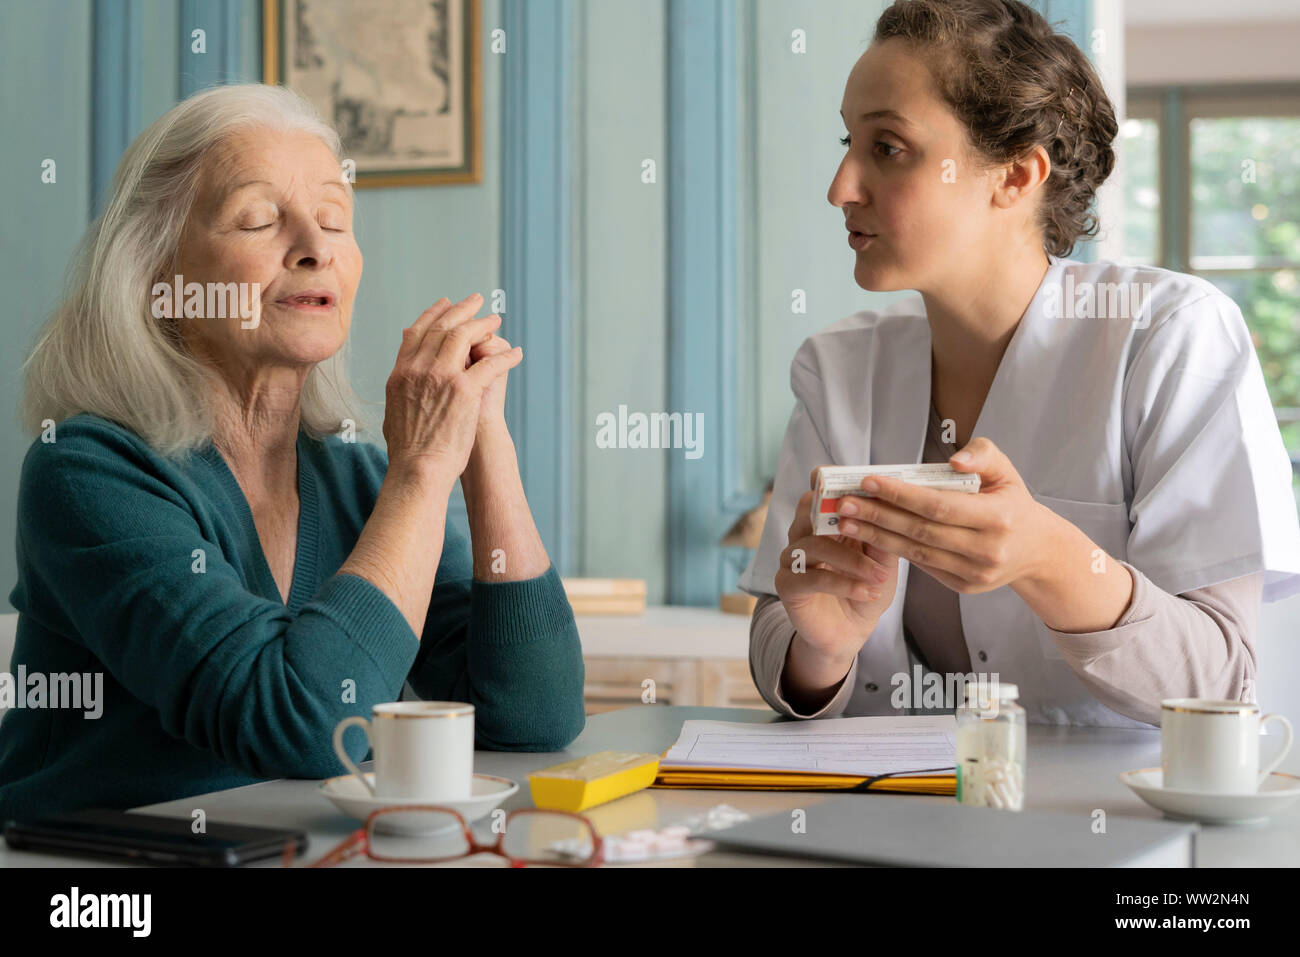 Doctor talking with patient Stock Photo